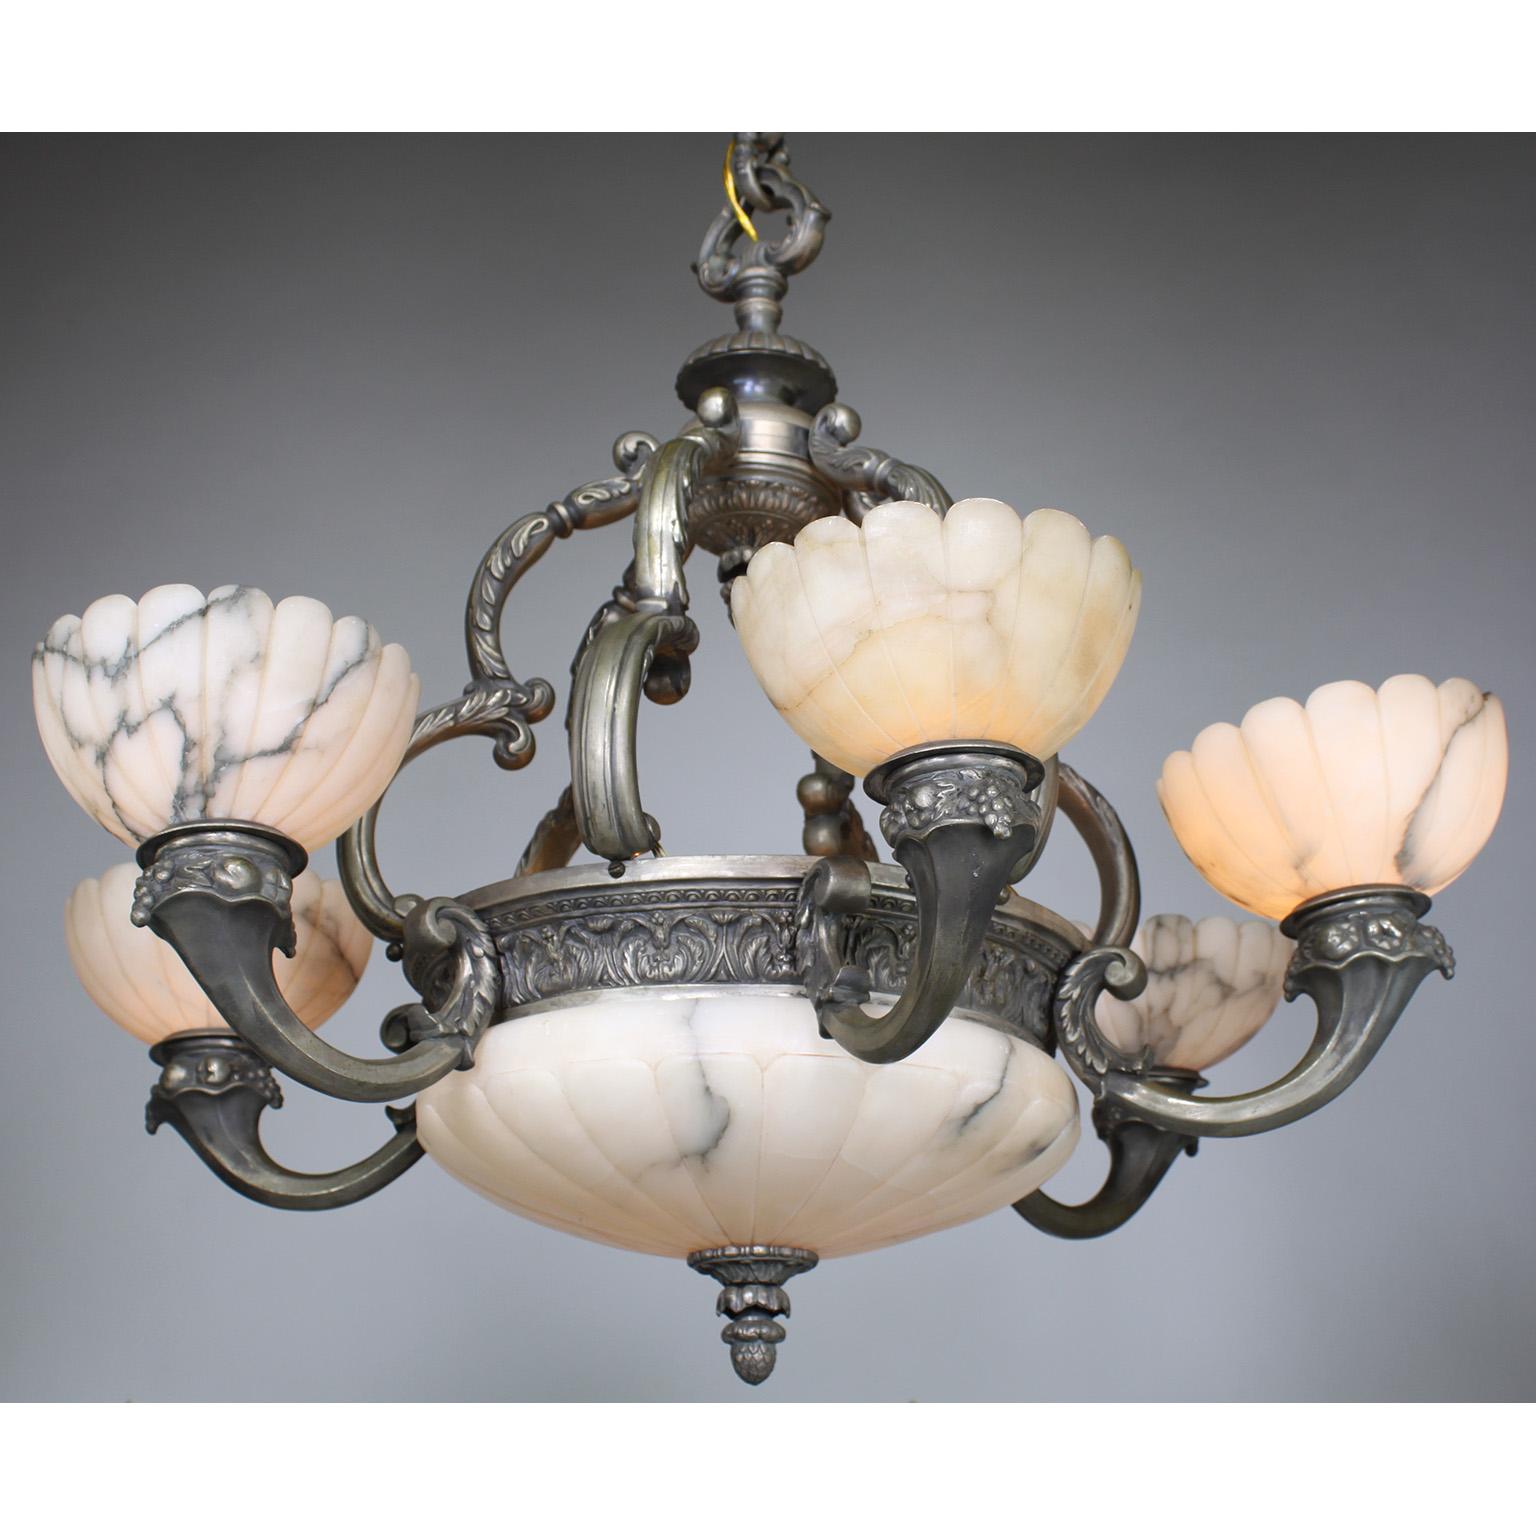 Art Deco French Early 20th C. Art-Deco Silvered Bronze & Alabaster 6-Light Chandelier For Sale